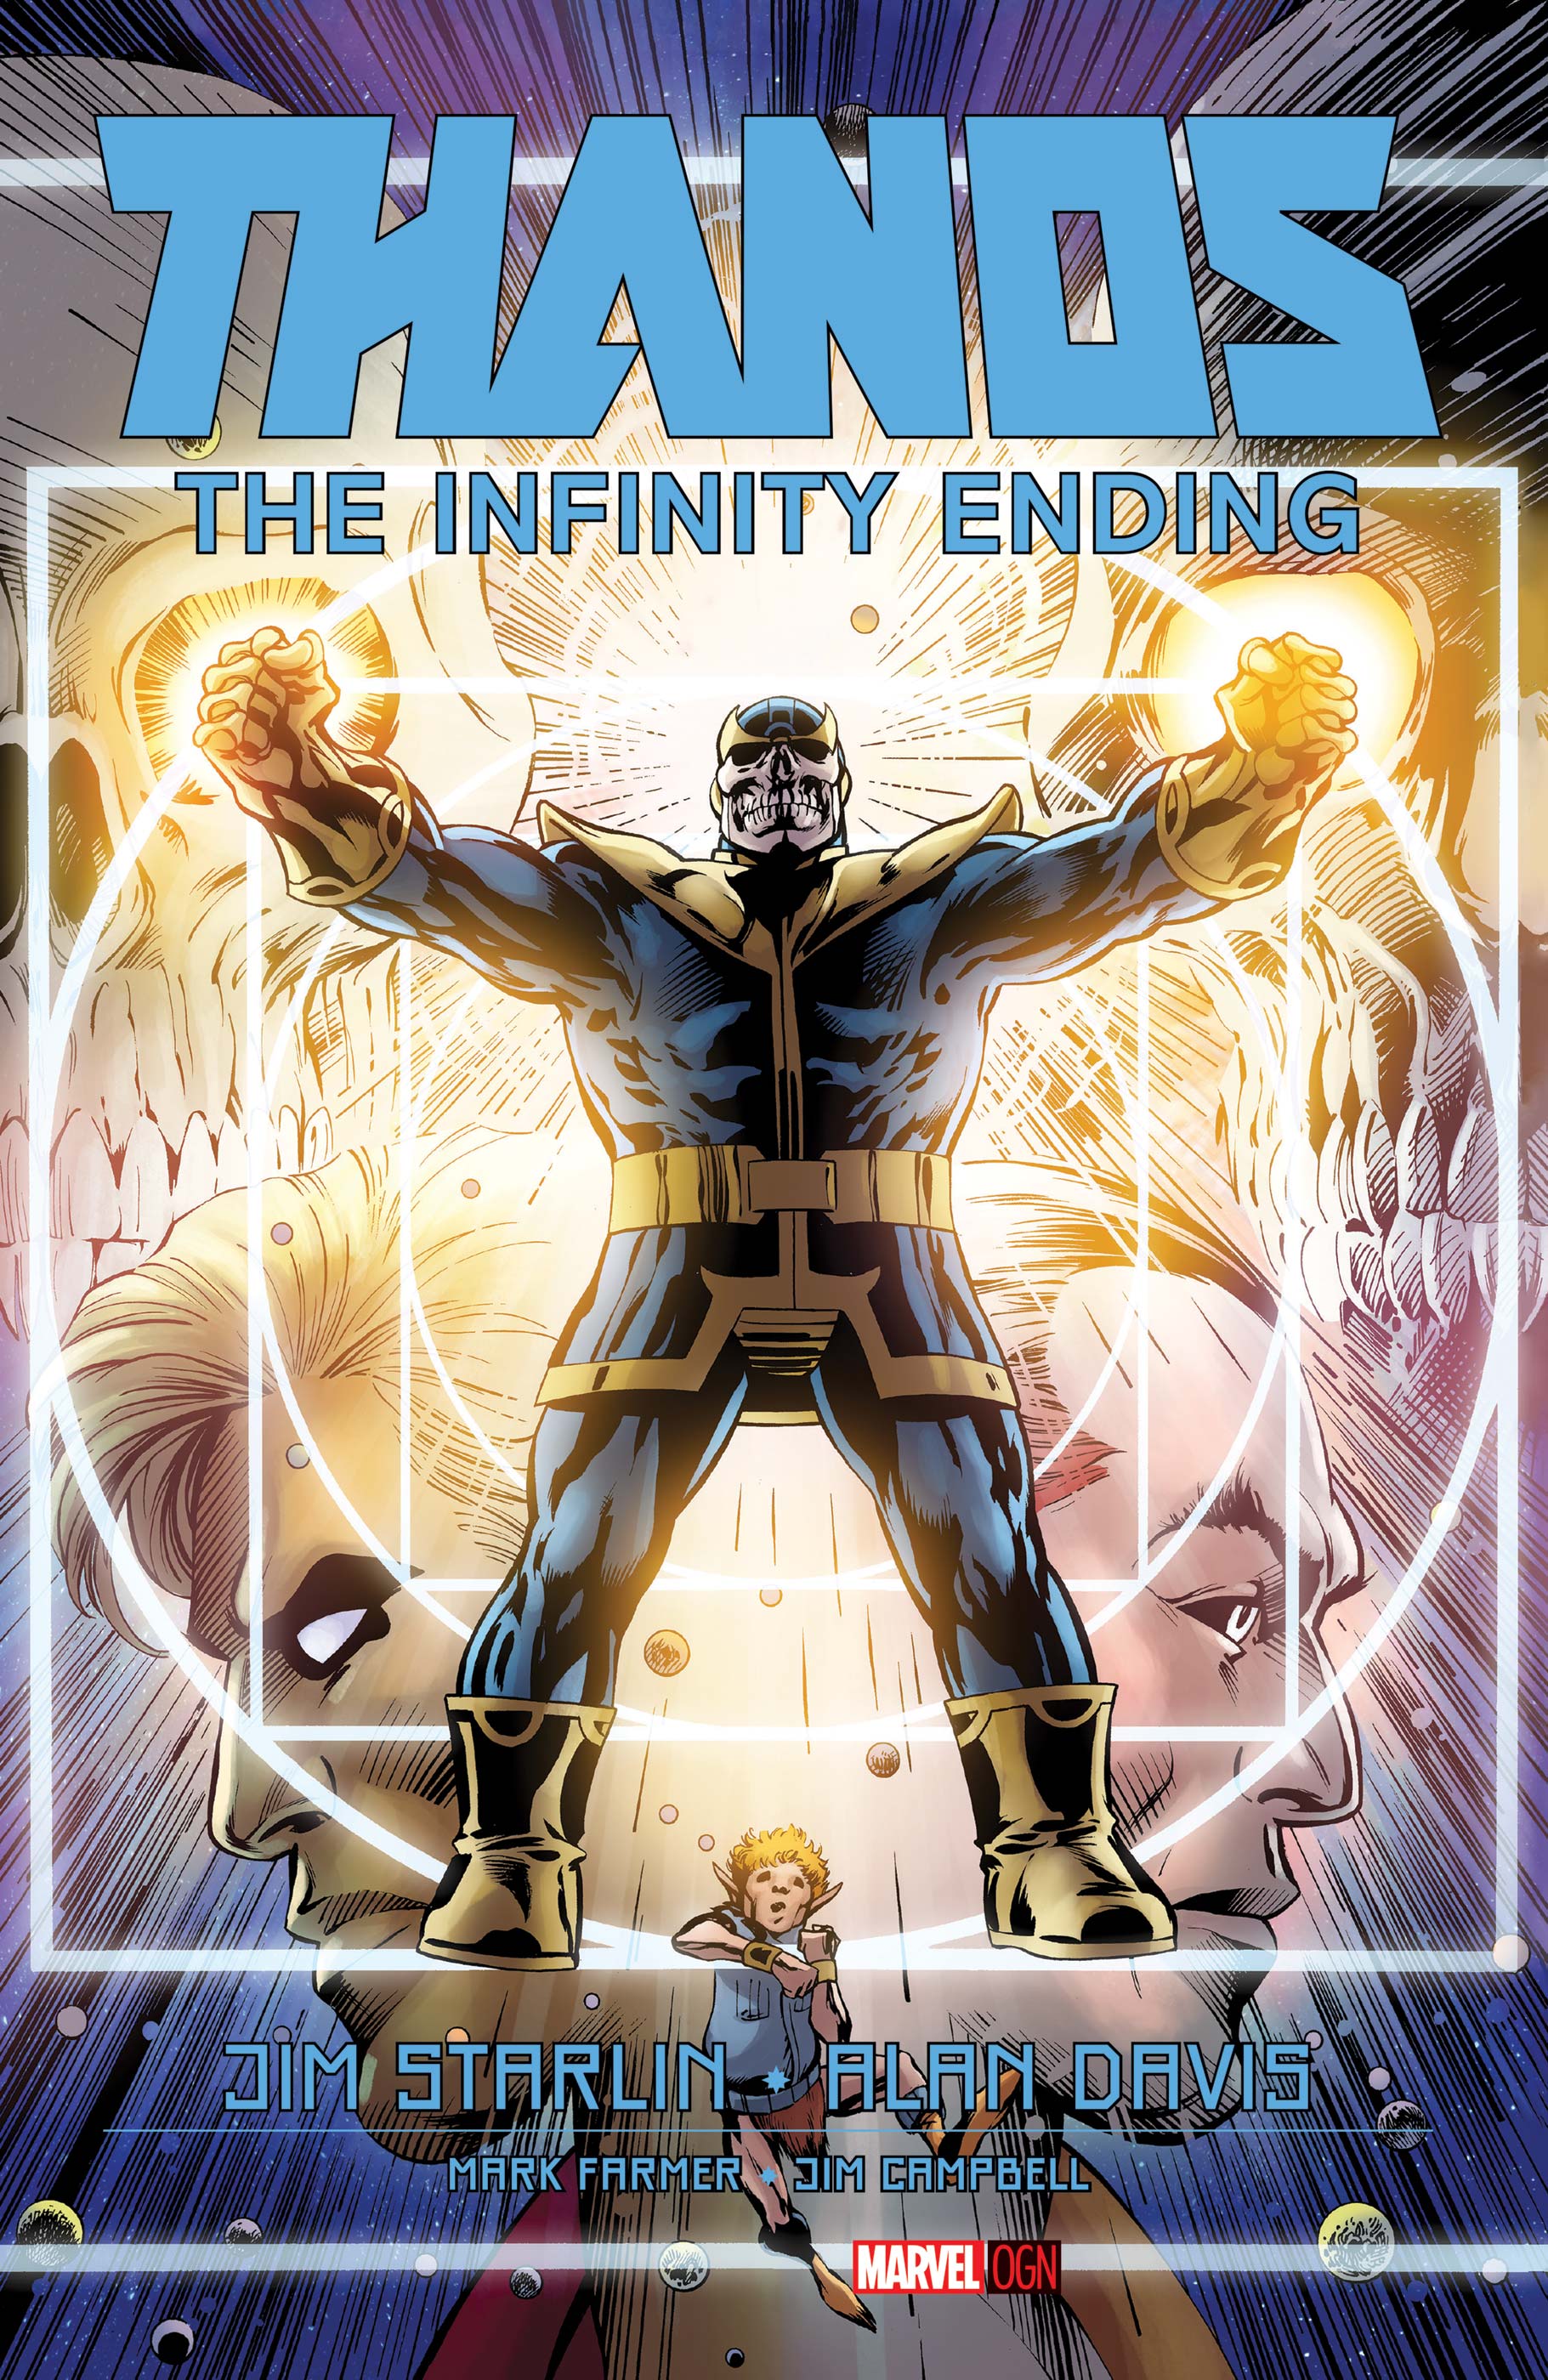 Thanos the infinity ending